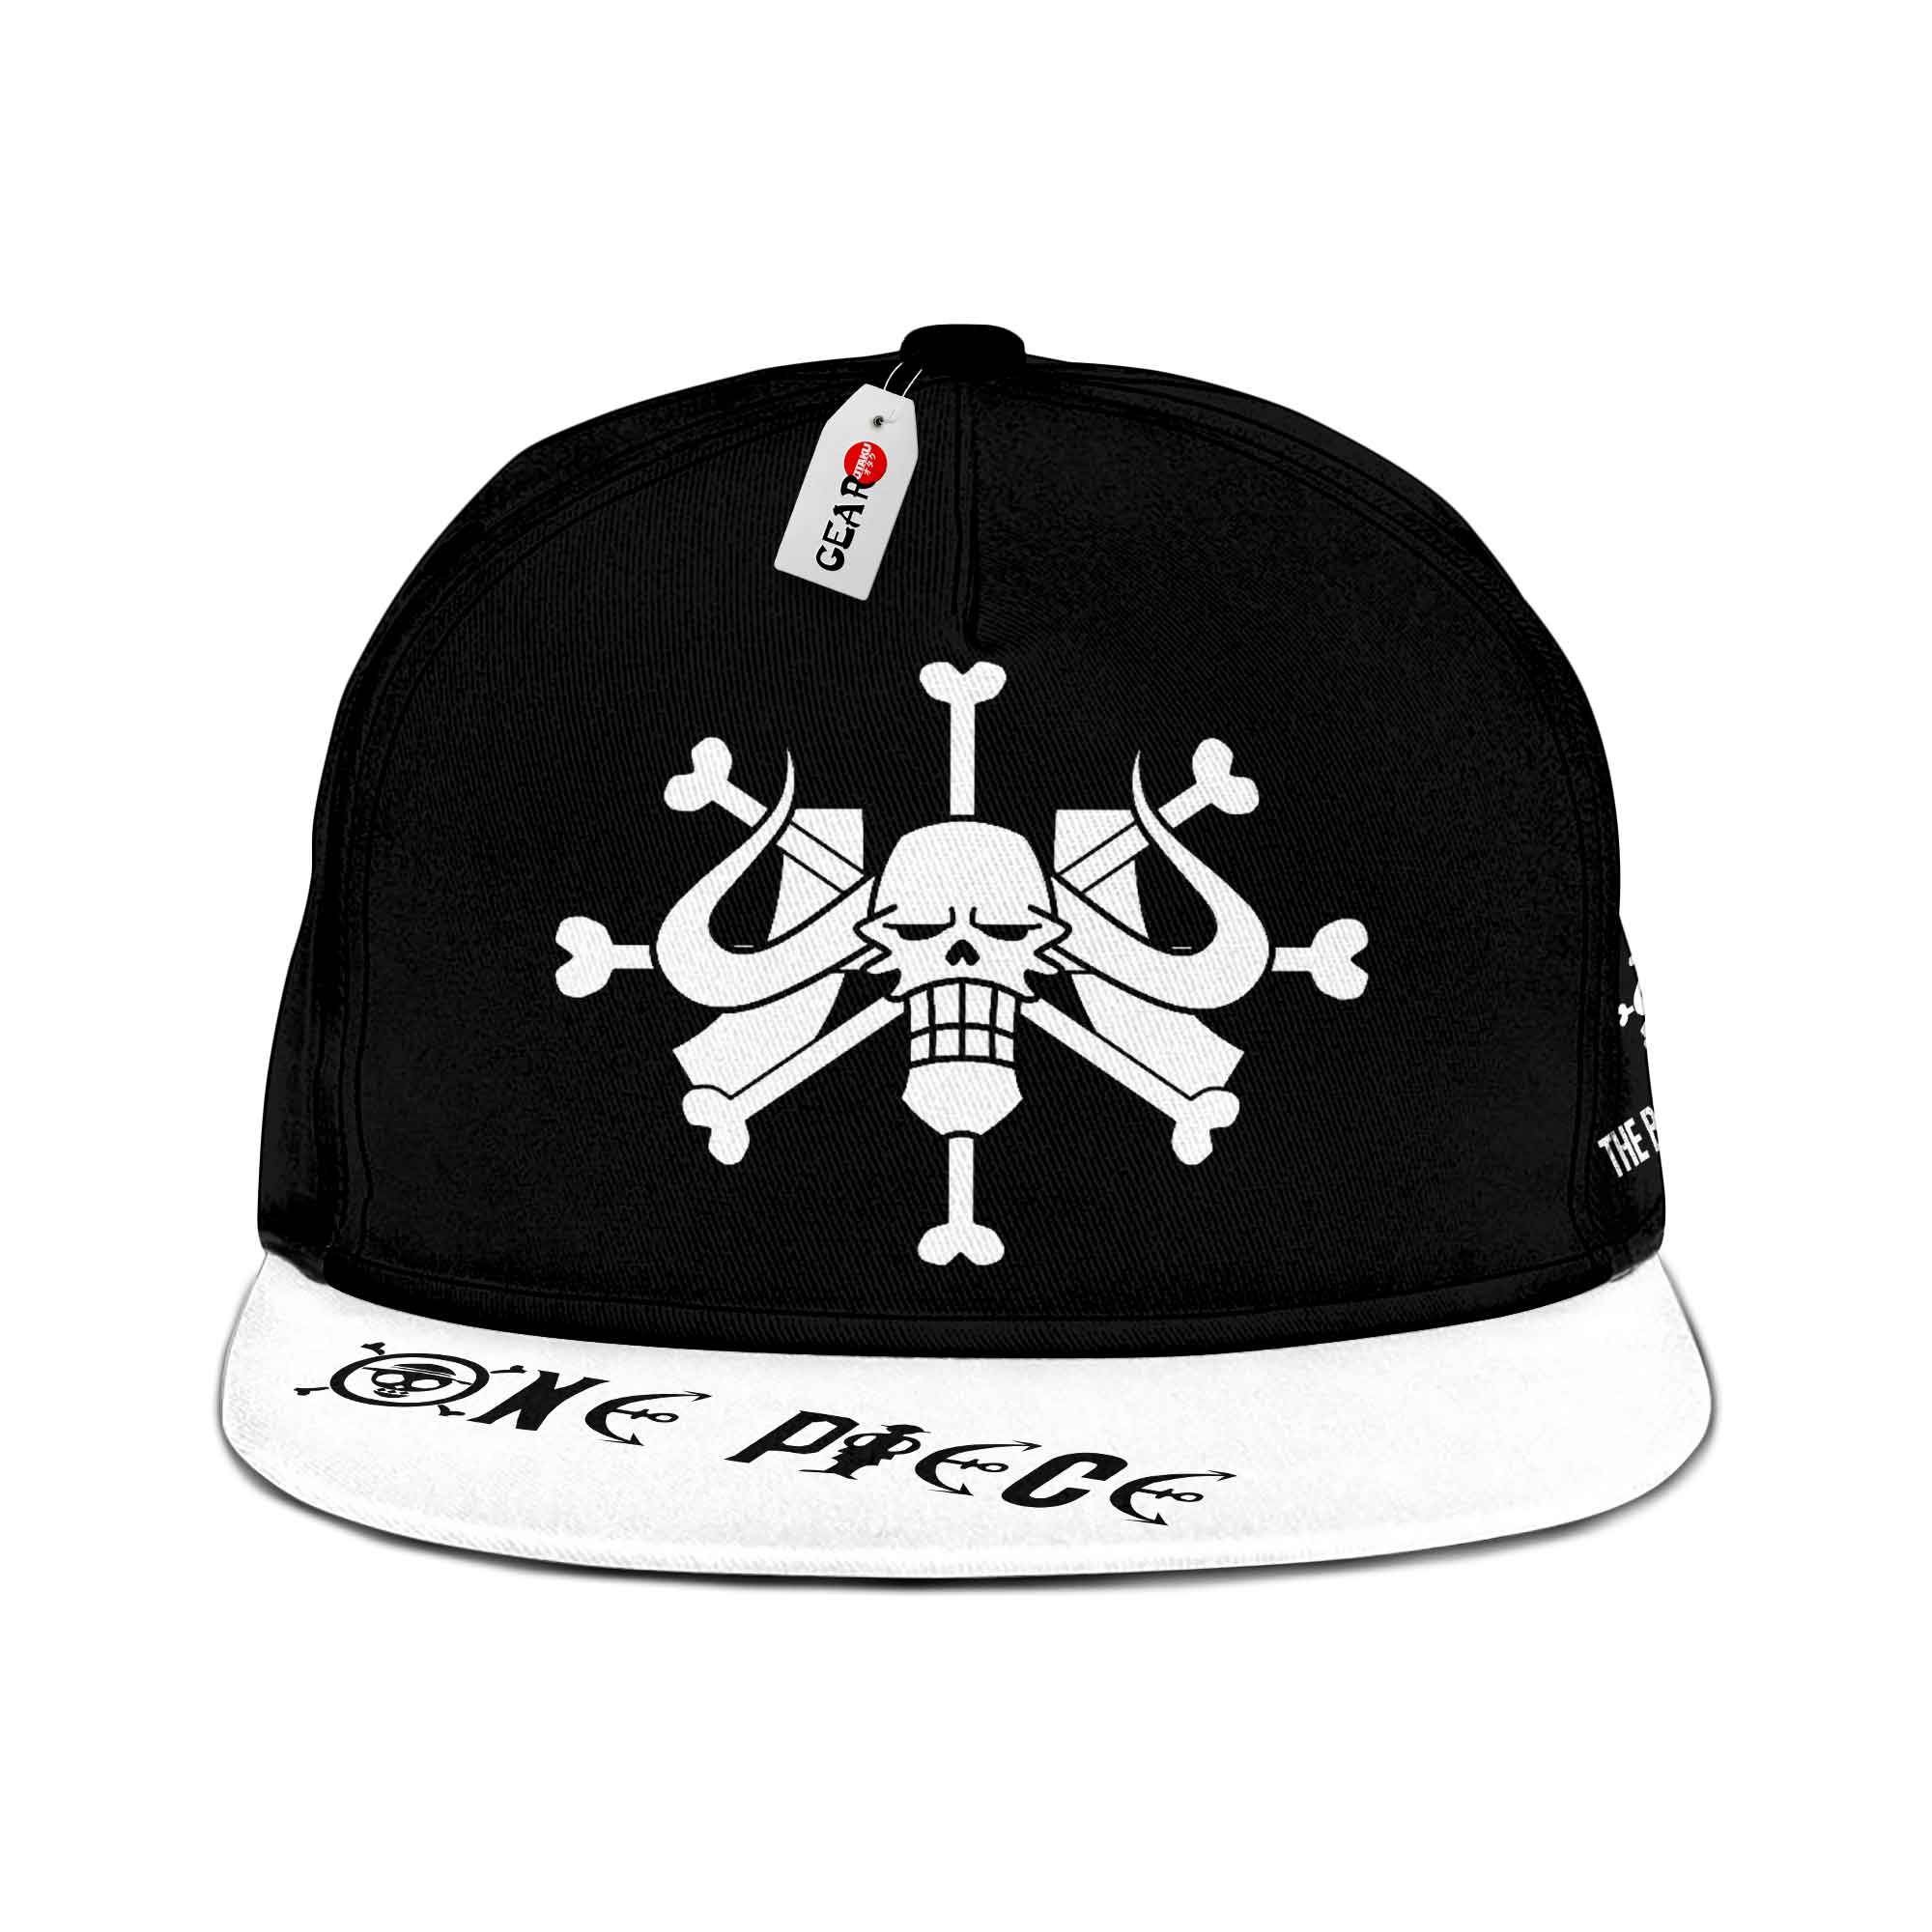 NEW The Beast Pirates One Piece Cap hat1